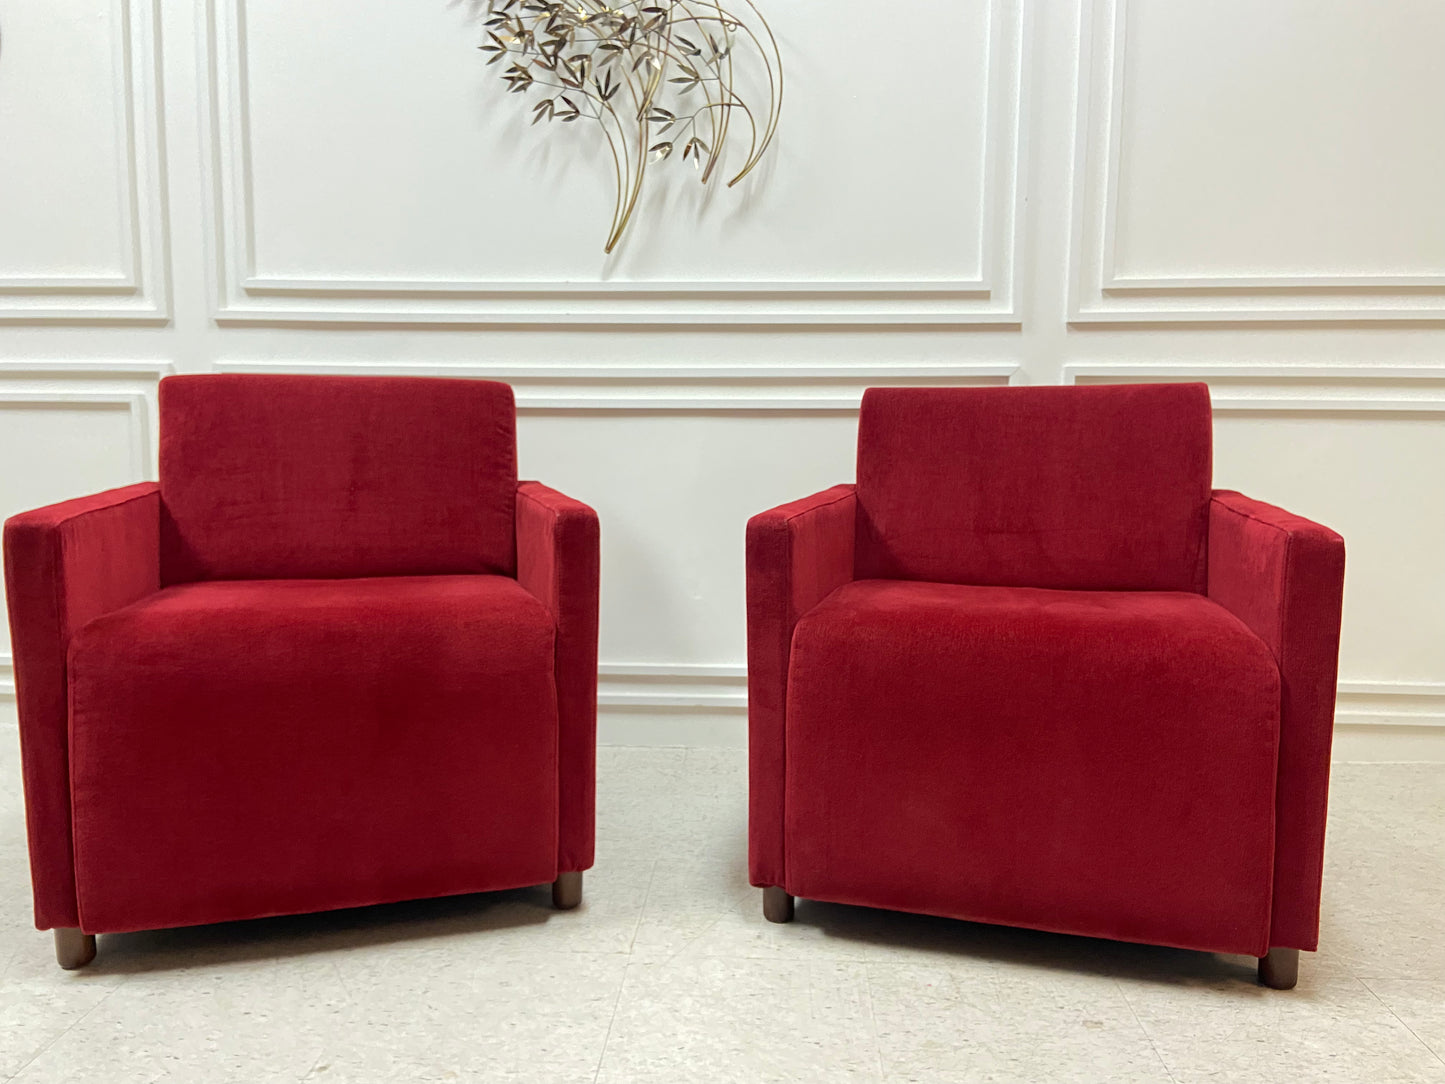 RUBY RED UPHOLSTERED STEELCASE ARM CHAIRS - PAIR